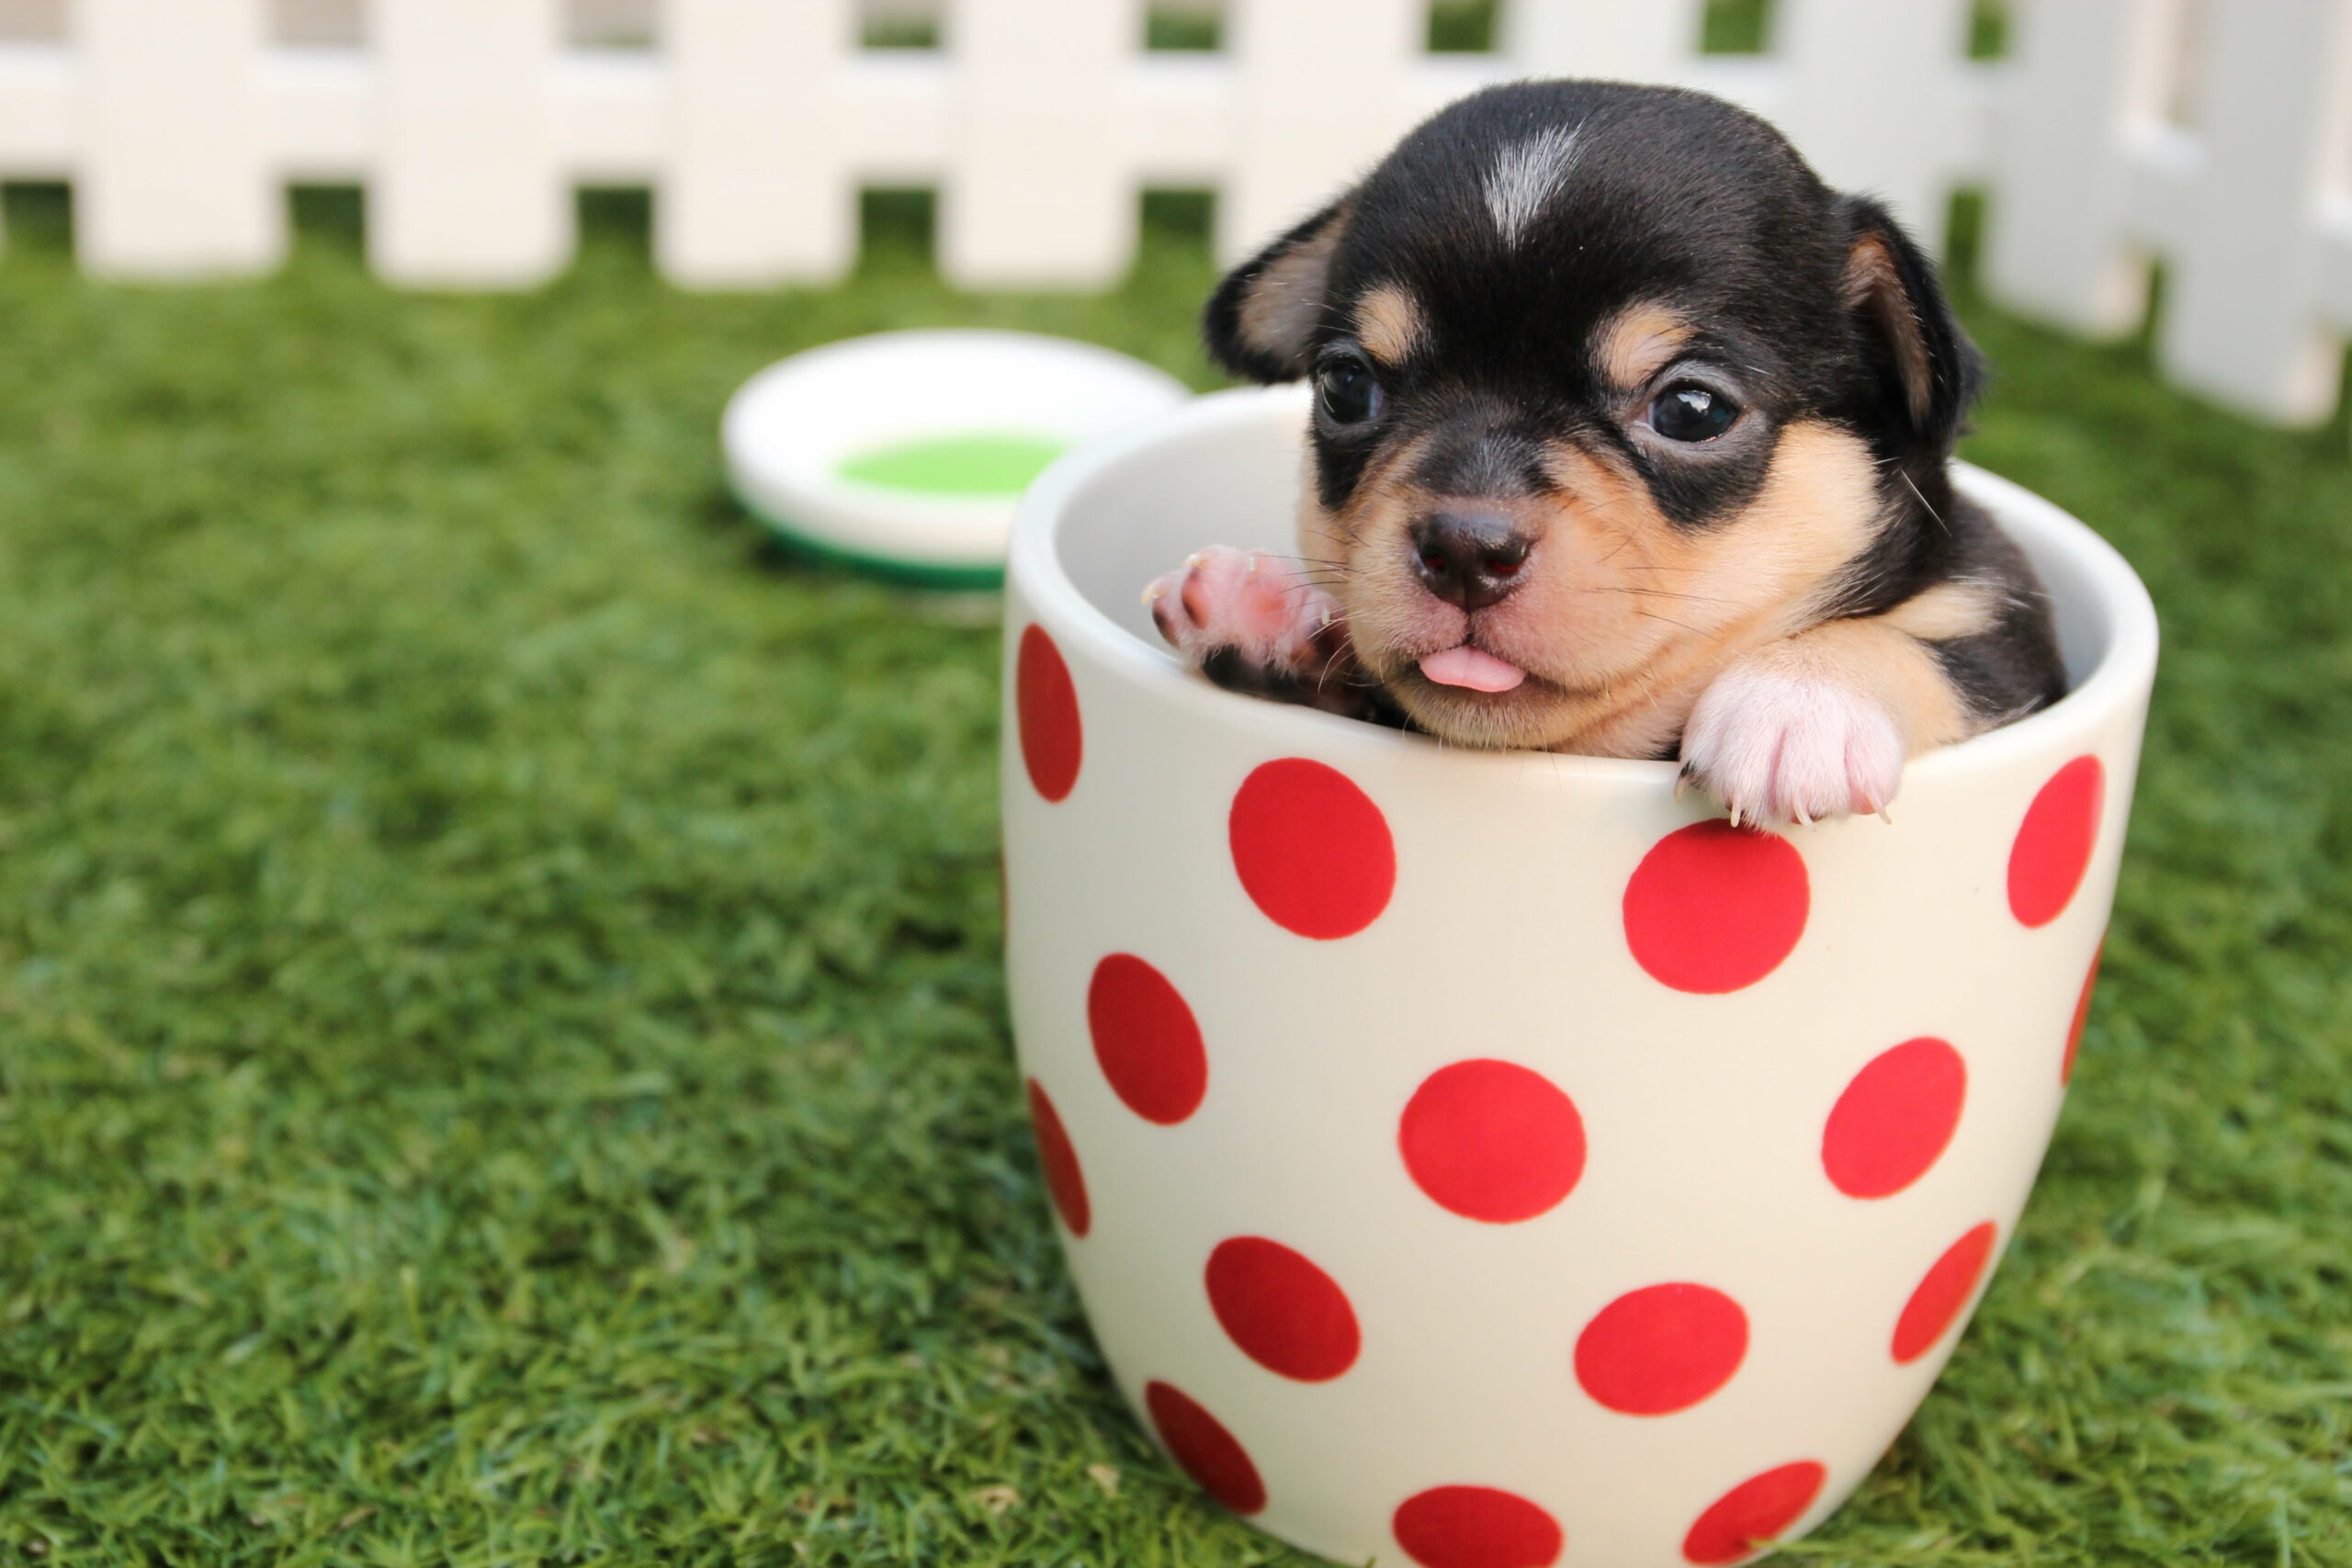 Teacup puppies: the unethical practices 